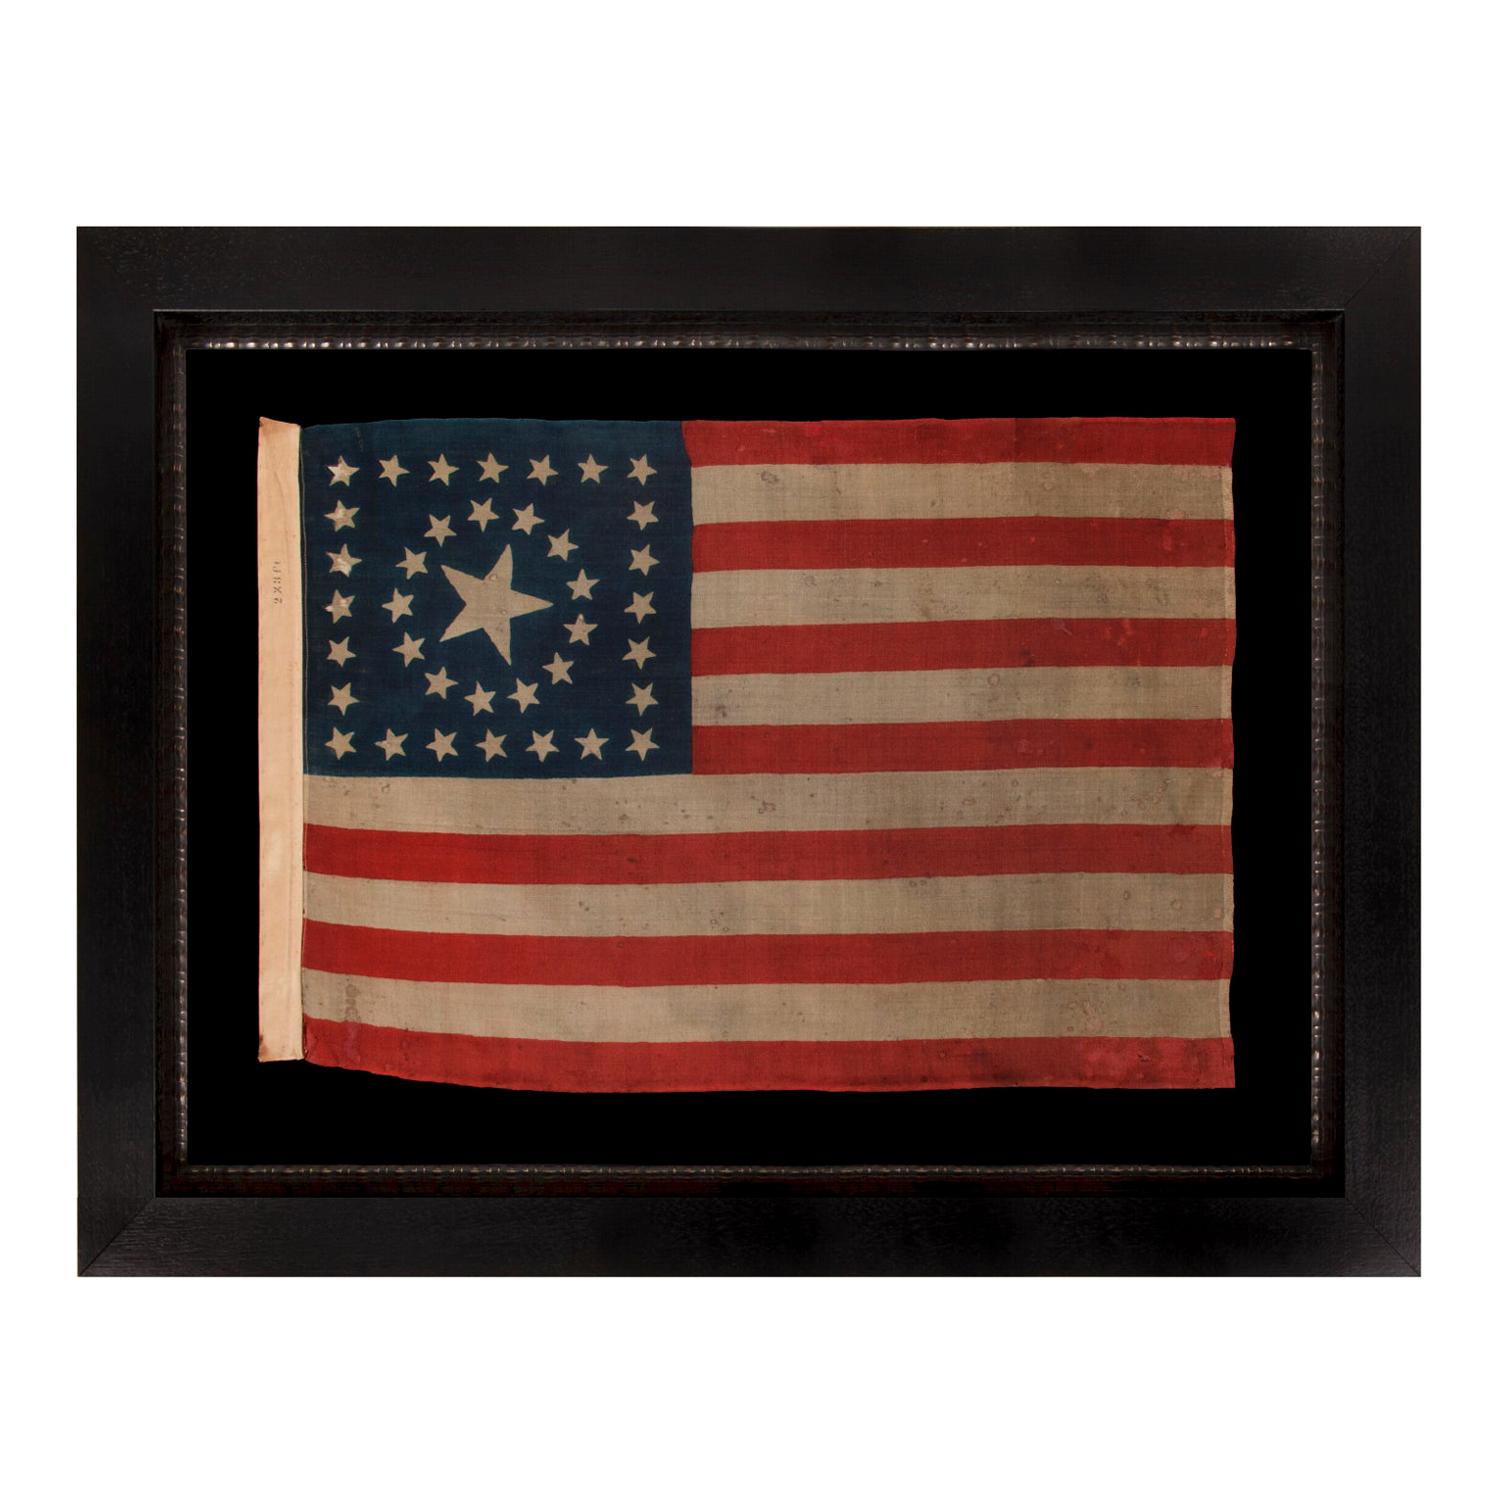 38 Star American Flag With Stars in a Rare Circle-In-A- Square Medallion